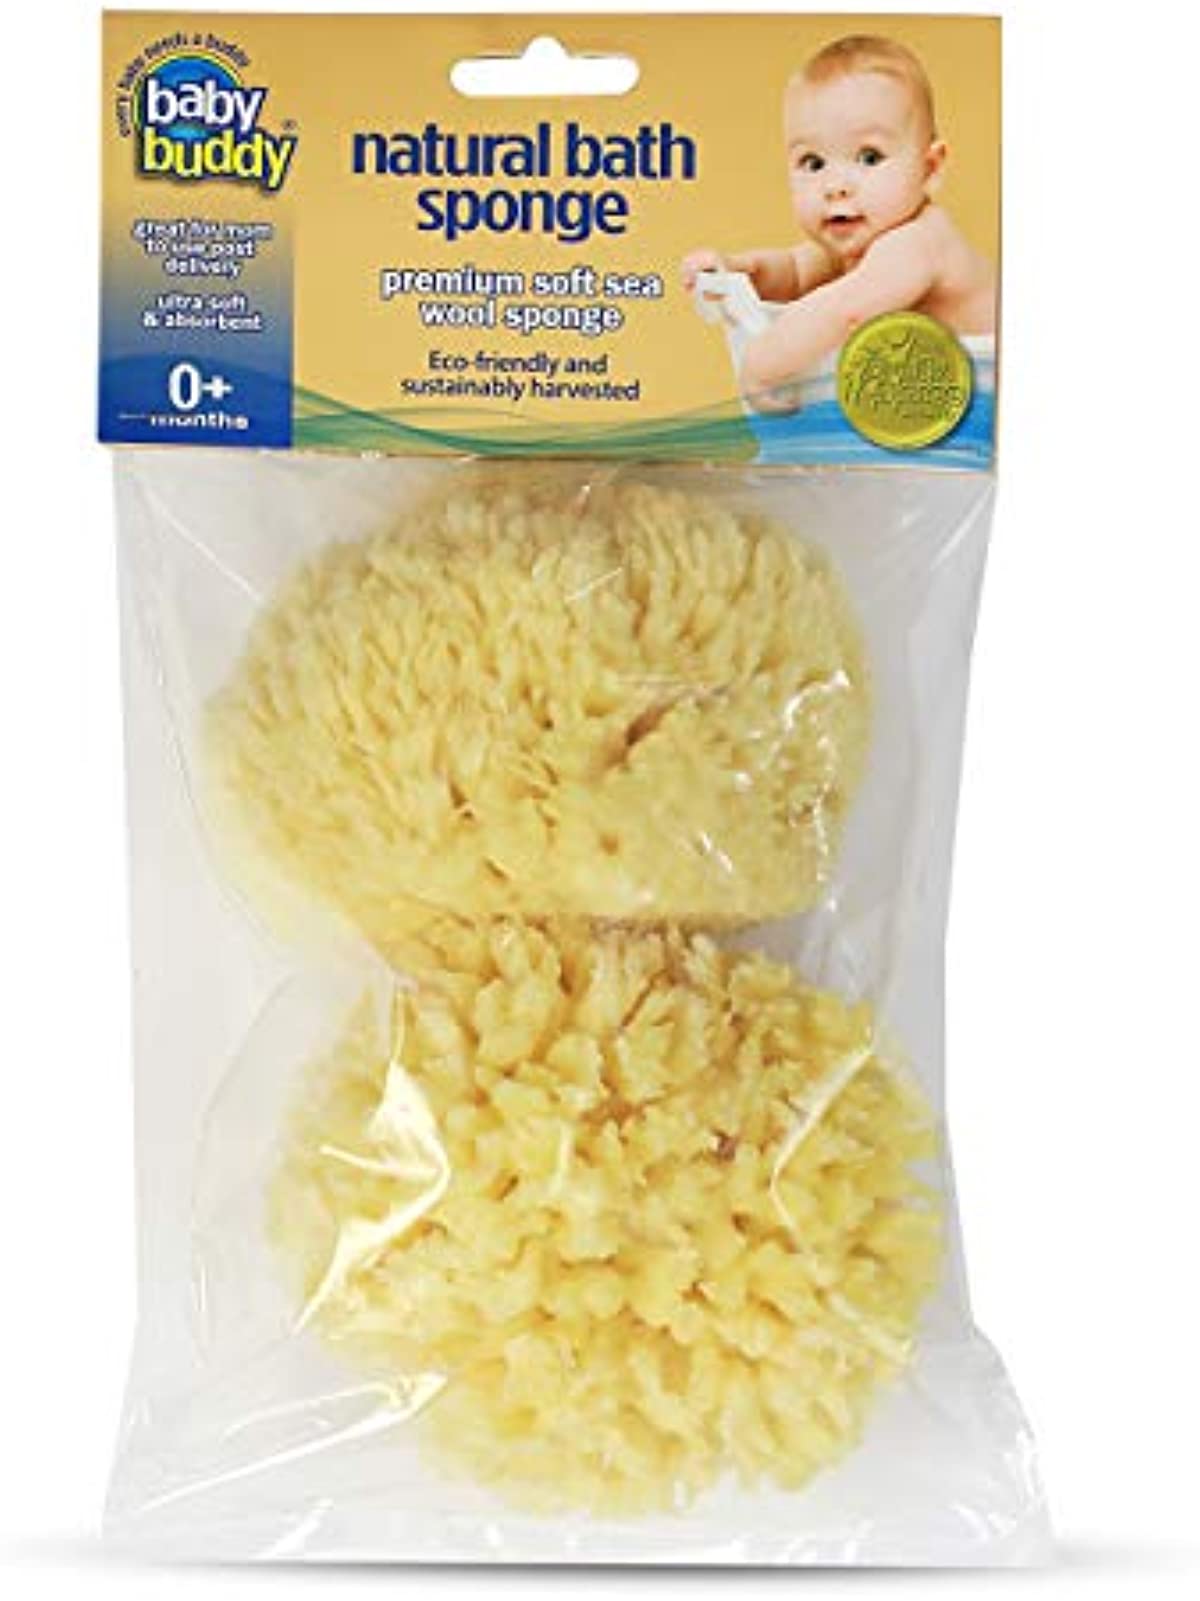 Baby Buddy Absorbent Natural Bath Sponge, Ultra Soft Premium Sea Wool Sponge, Soft on Baby’s Tender Skin, Bath Accessories Baby and Kids, Infant Bath, Biodegradable, Hypoallergenic, 2pk, 4in